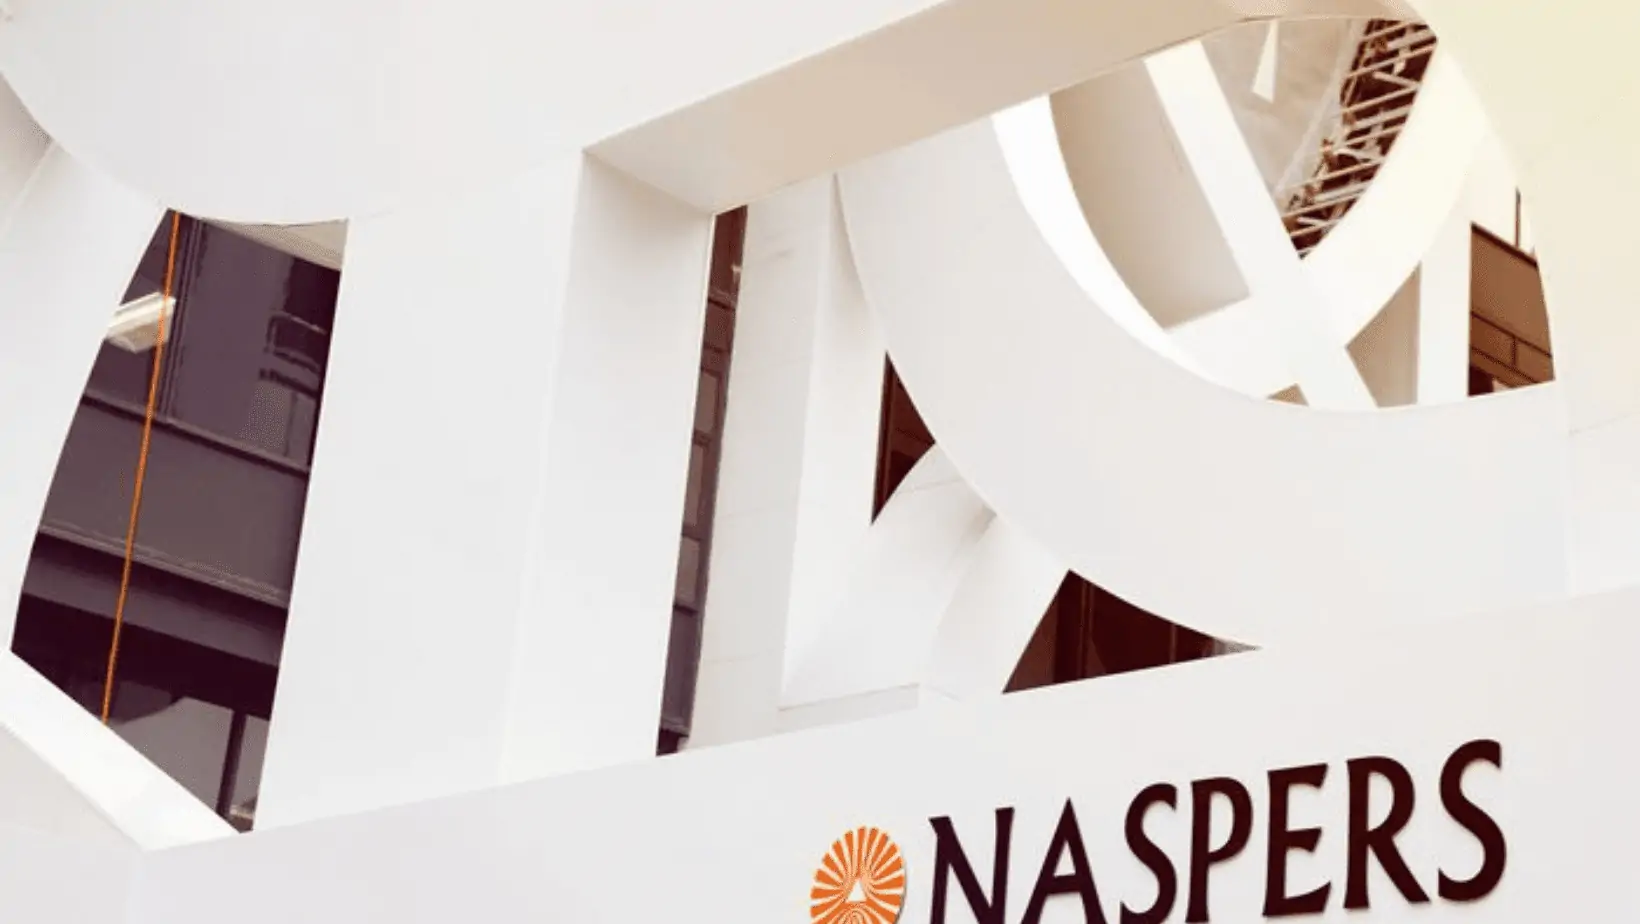 Naspers’ Bold Buyback: South African Tech Giant Invests ZAR1.17 Billion in Strategic Share Repurchase Move